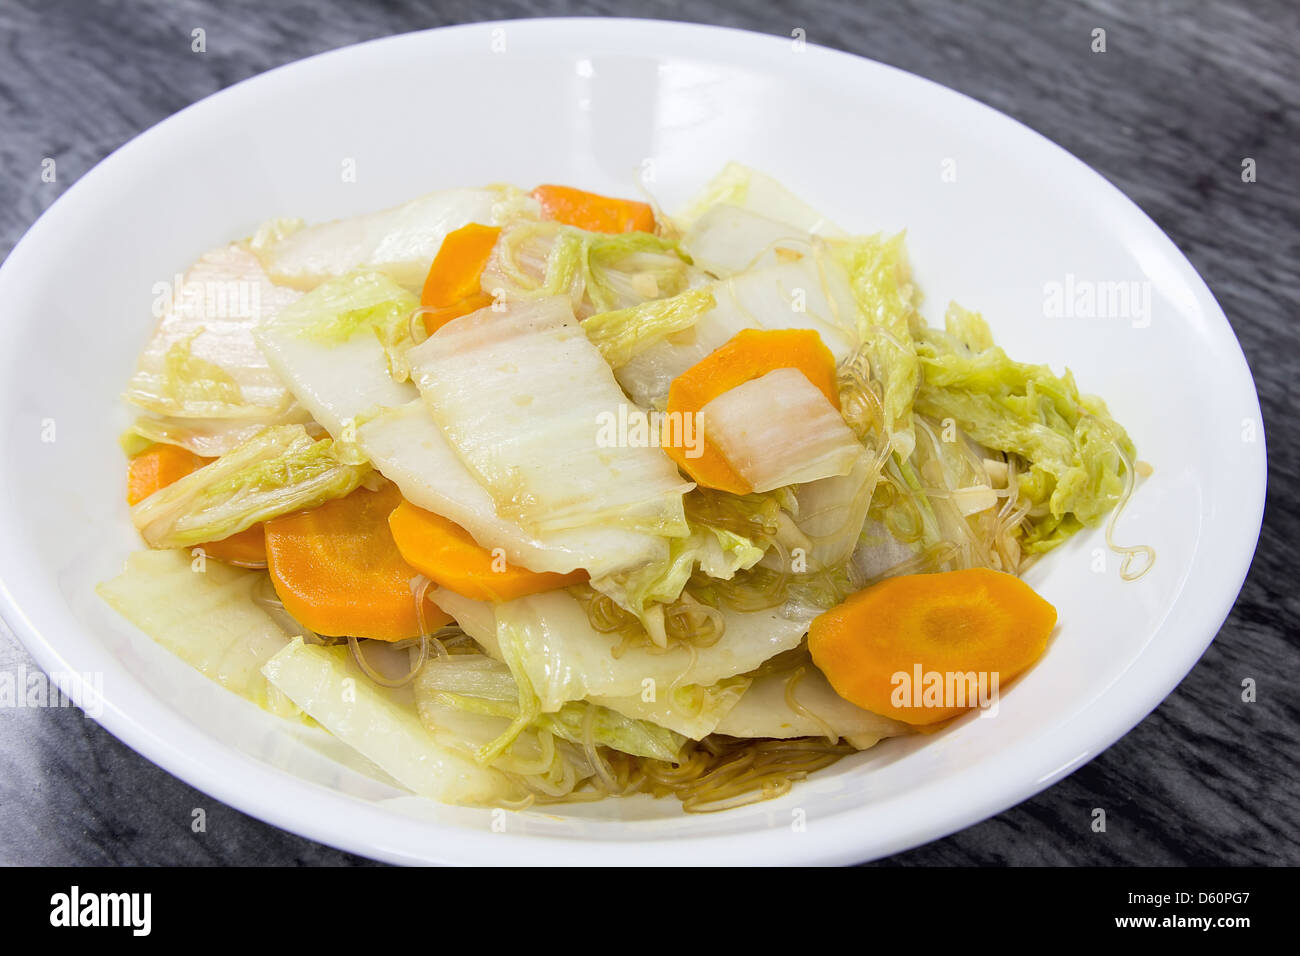 Stir Fry Chinese Cabbage with Garlic Sliced Carrots and Clear Bean Thread Noodles Dish Stock Photo